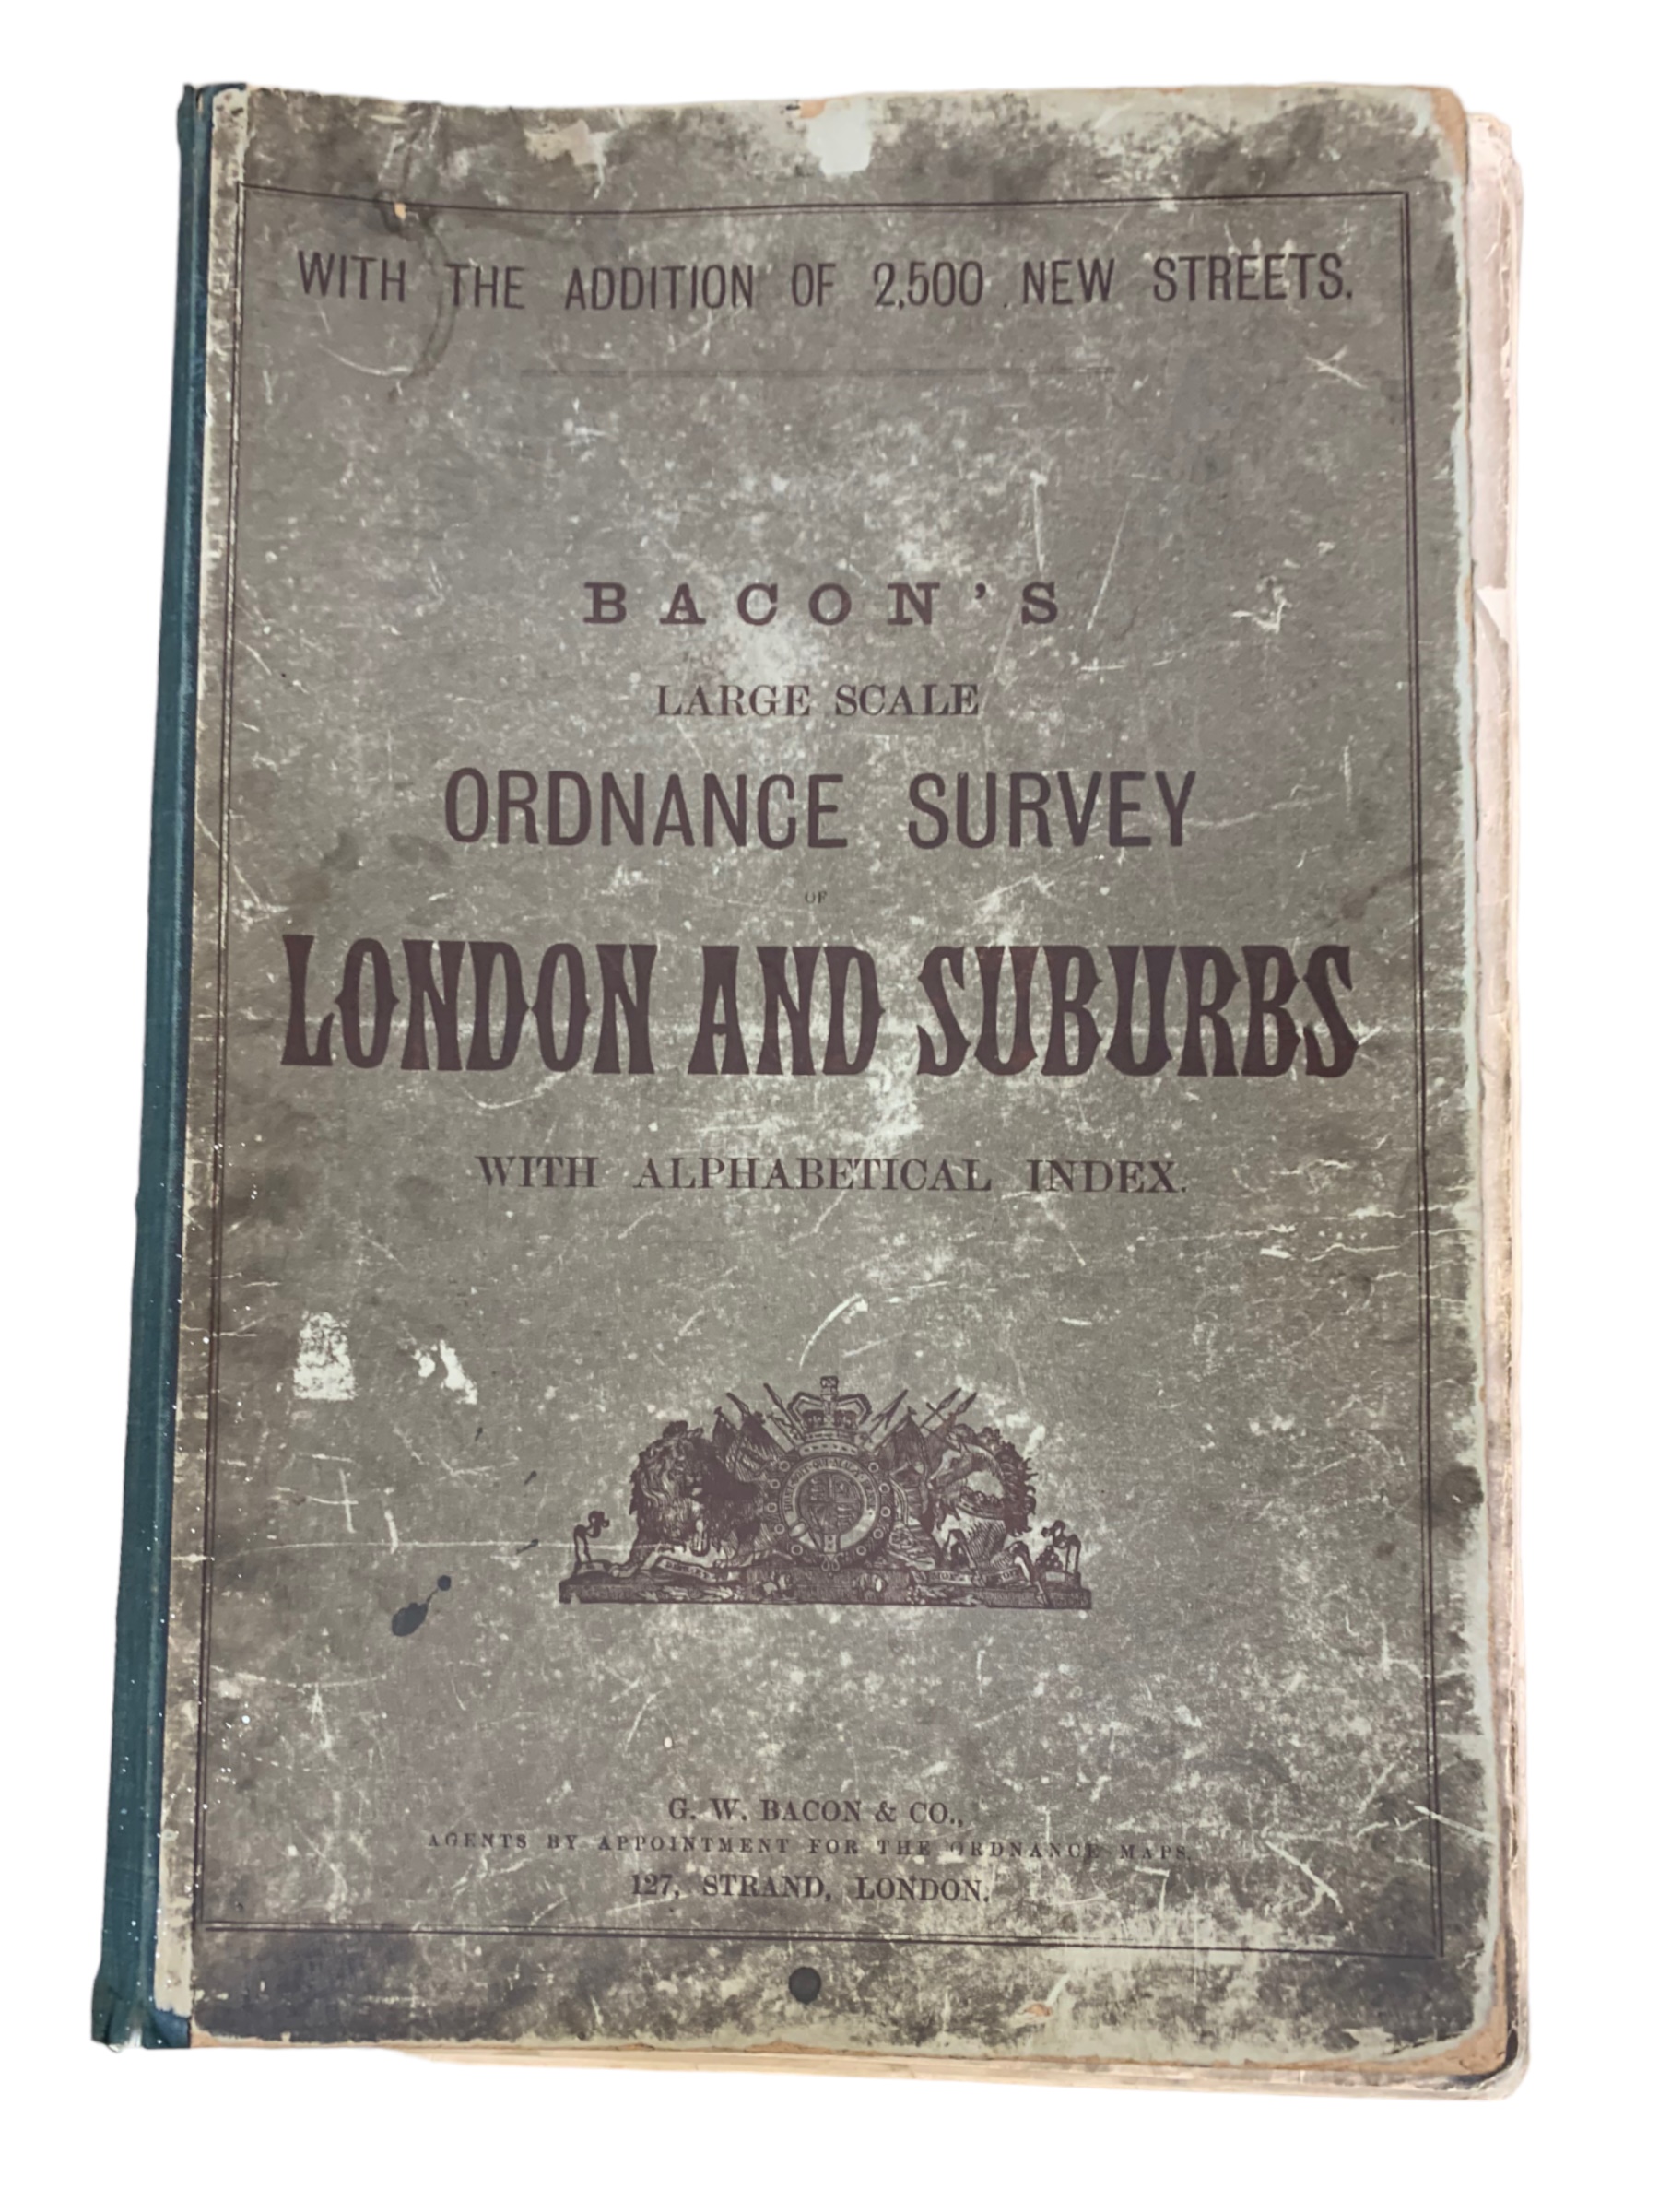 Bacon's New Ordnance Survey Atlas of London and Suburbs, c. 1880 - Image 2 of 7